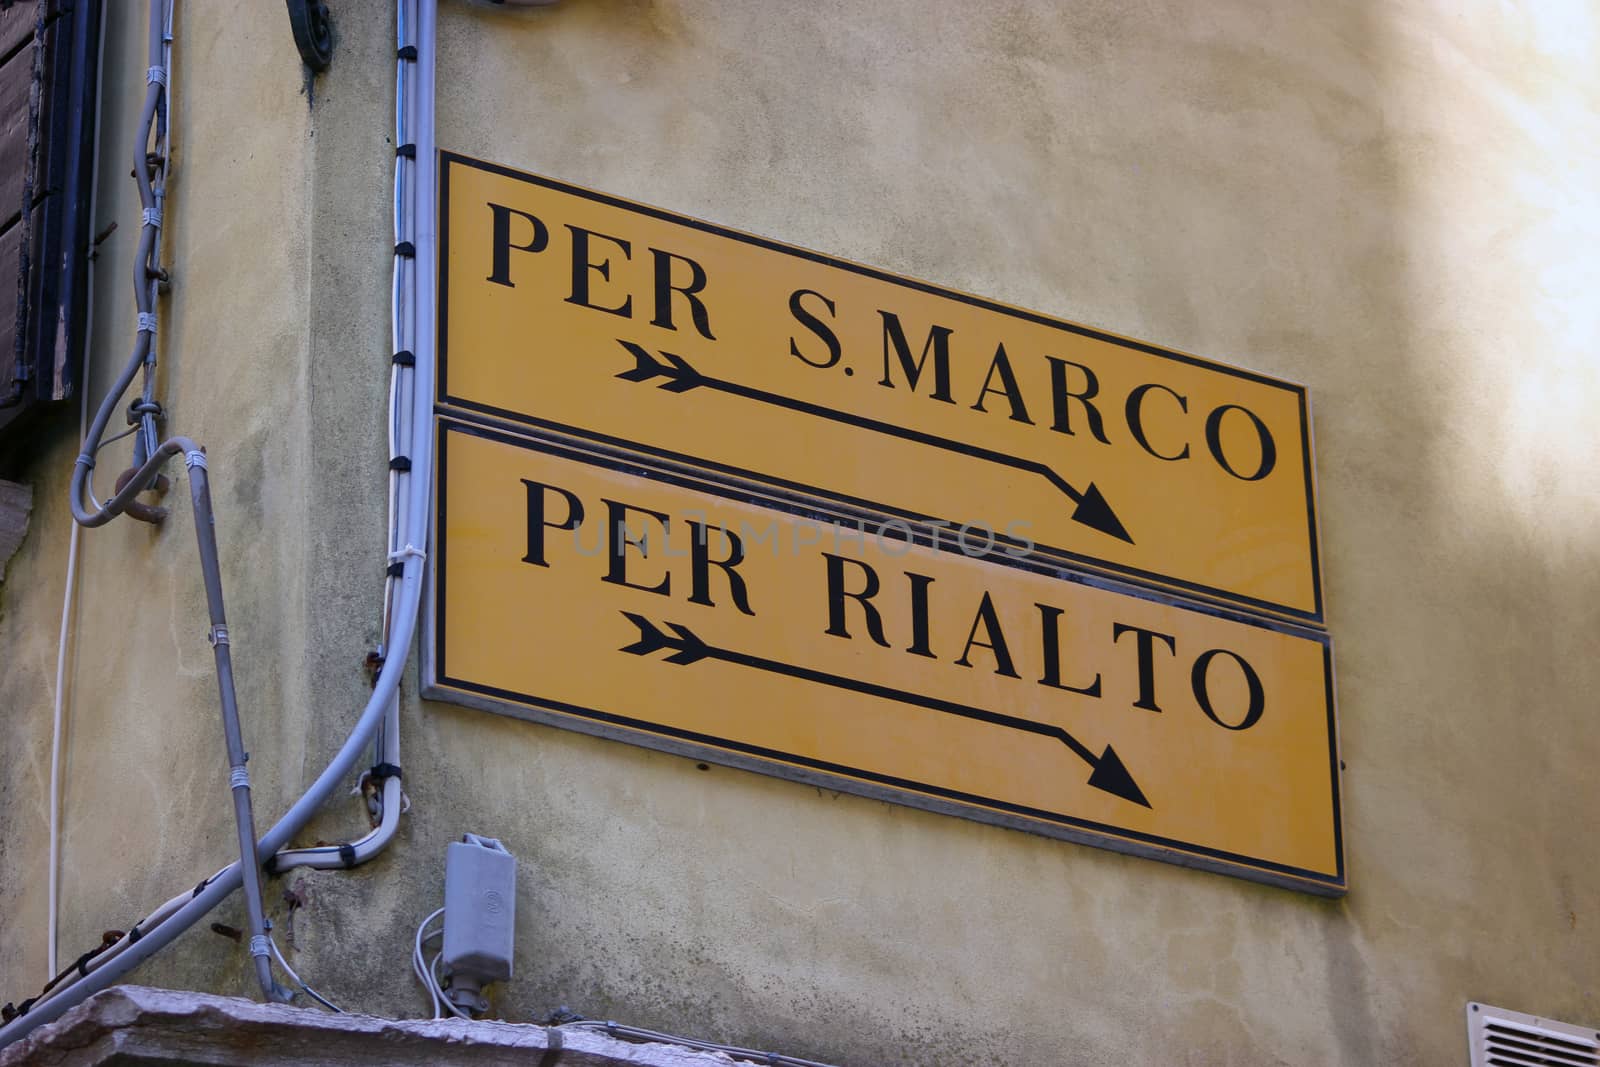 Directional sign to San Marco square and Rialto bridge on old Venetian building
